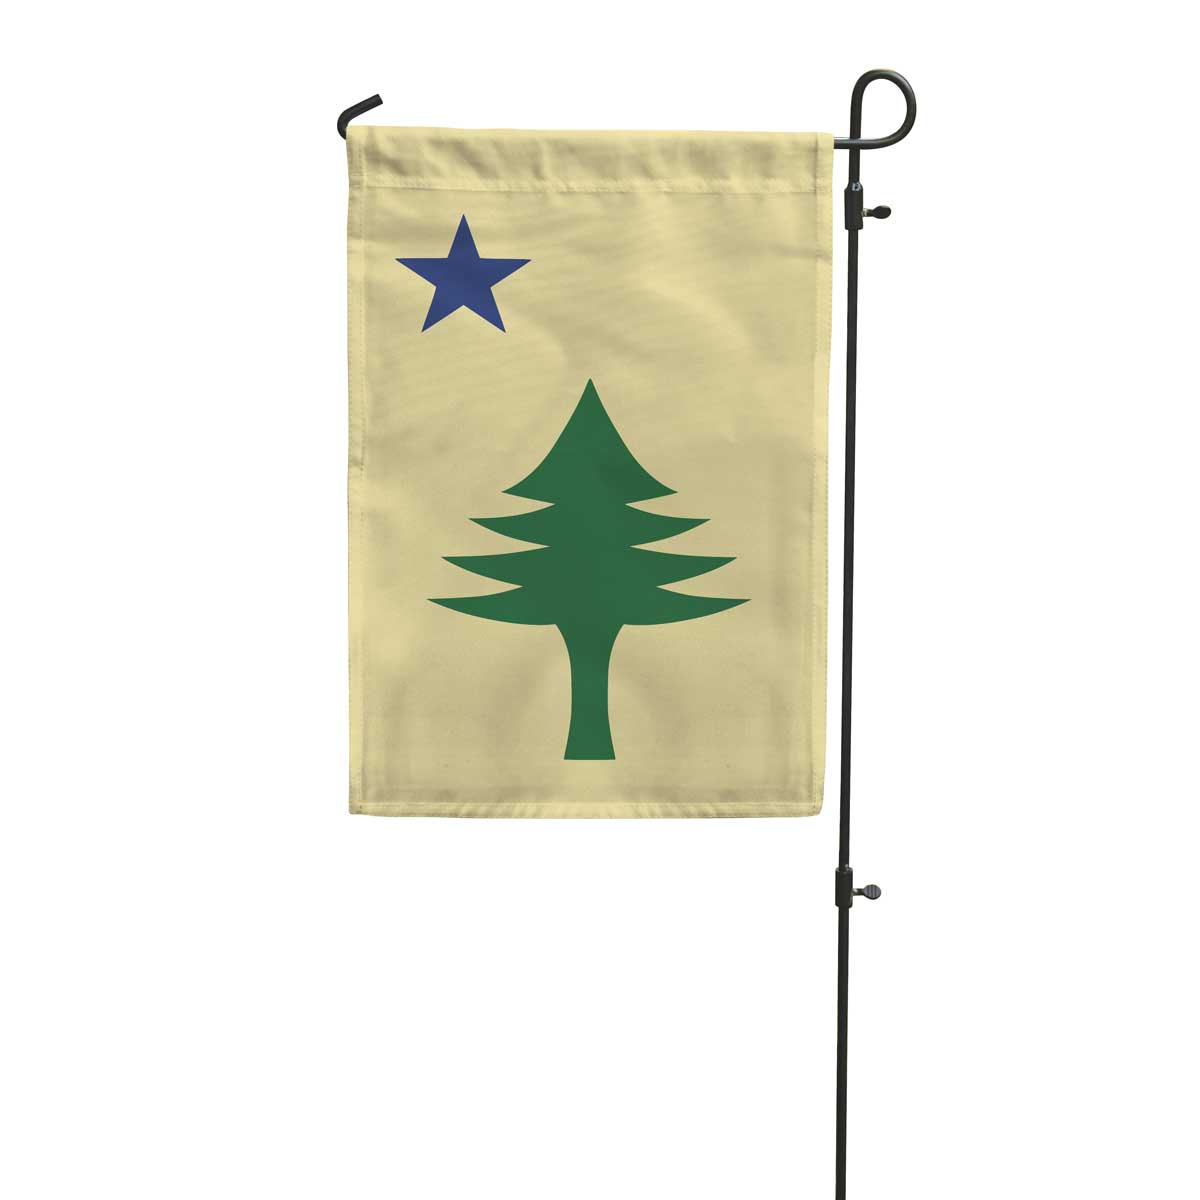 Maine 1901 garden flag with maritime tree produced by flags for good